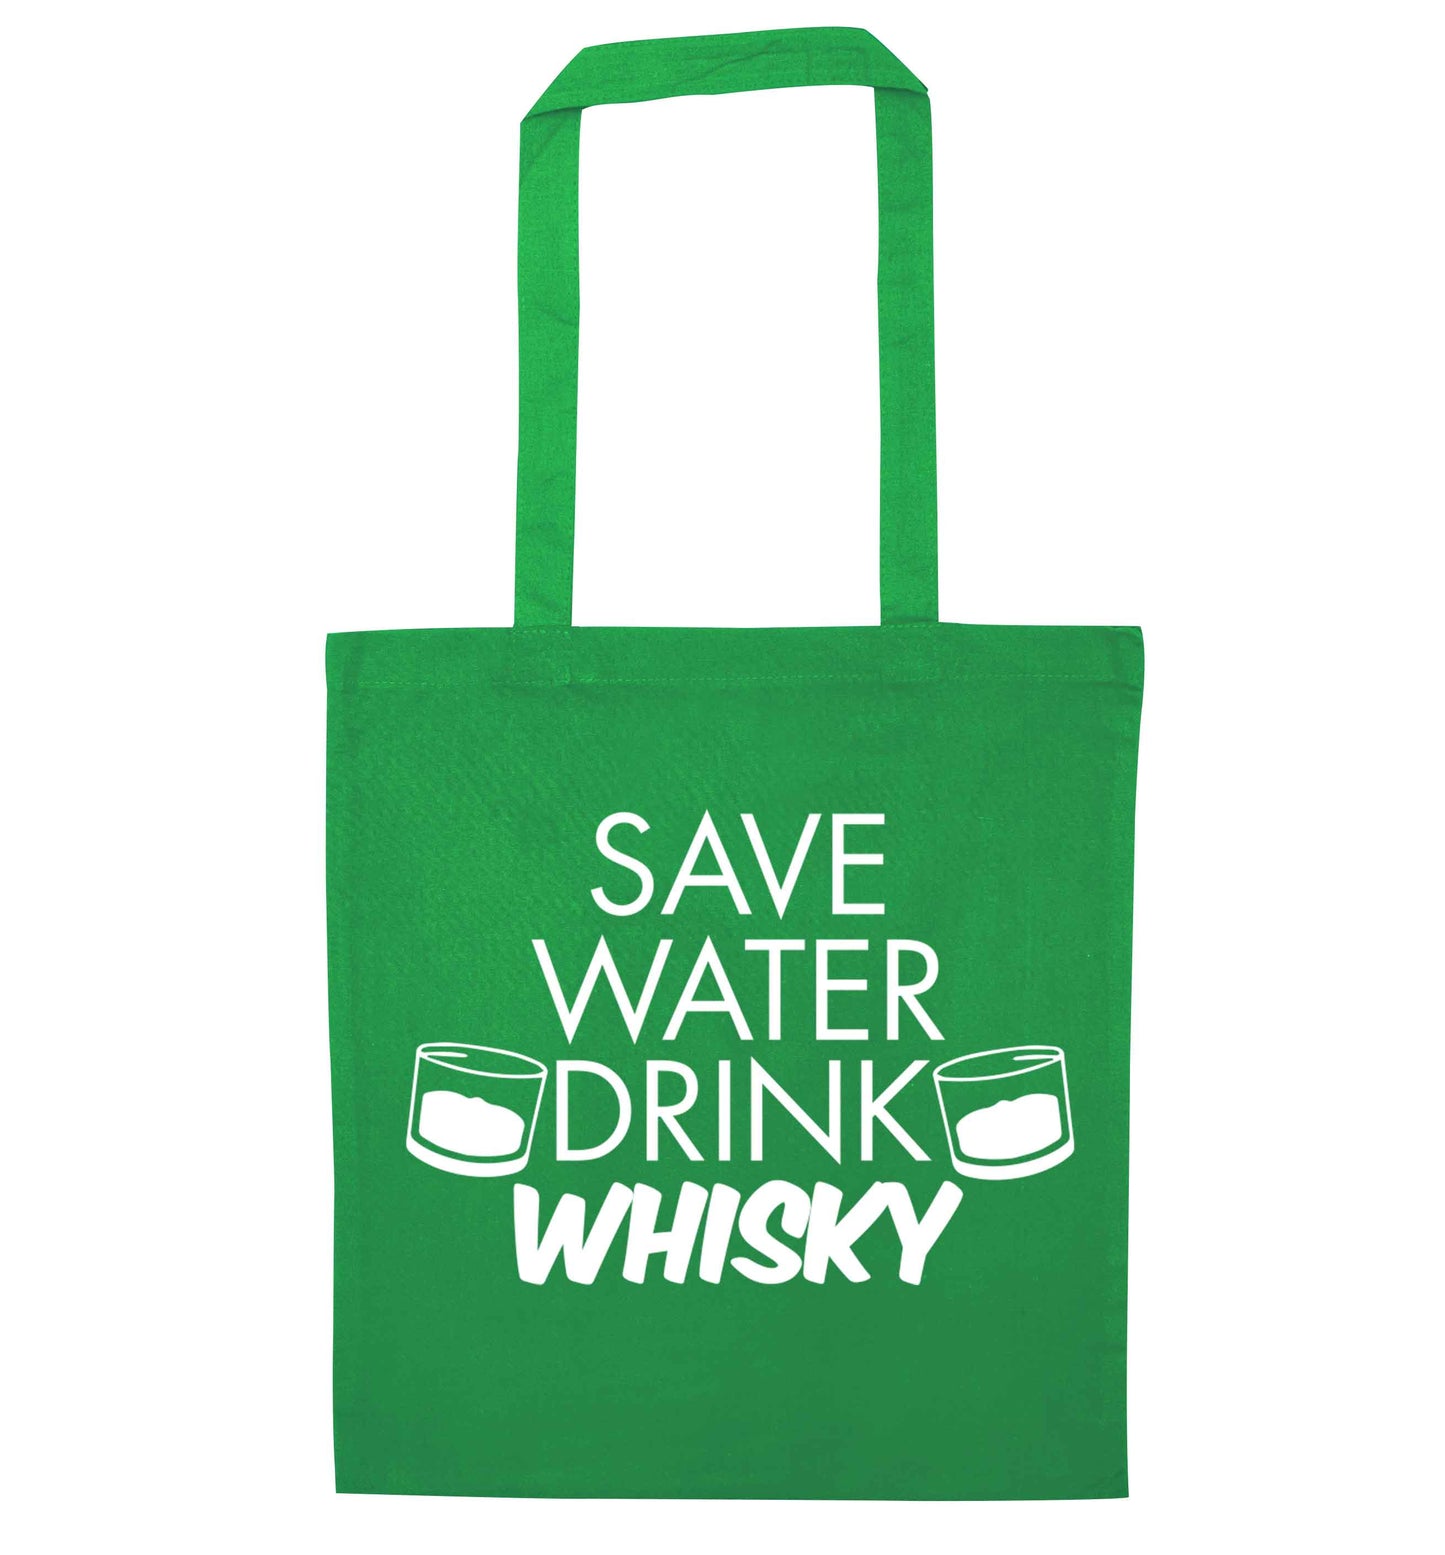 Save water drink whisky green tote bag